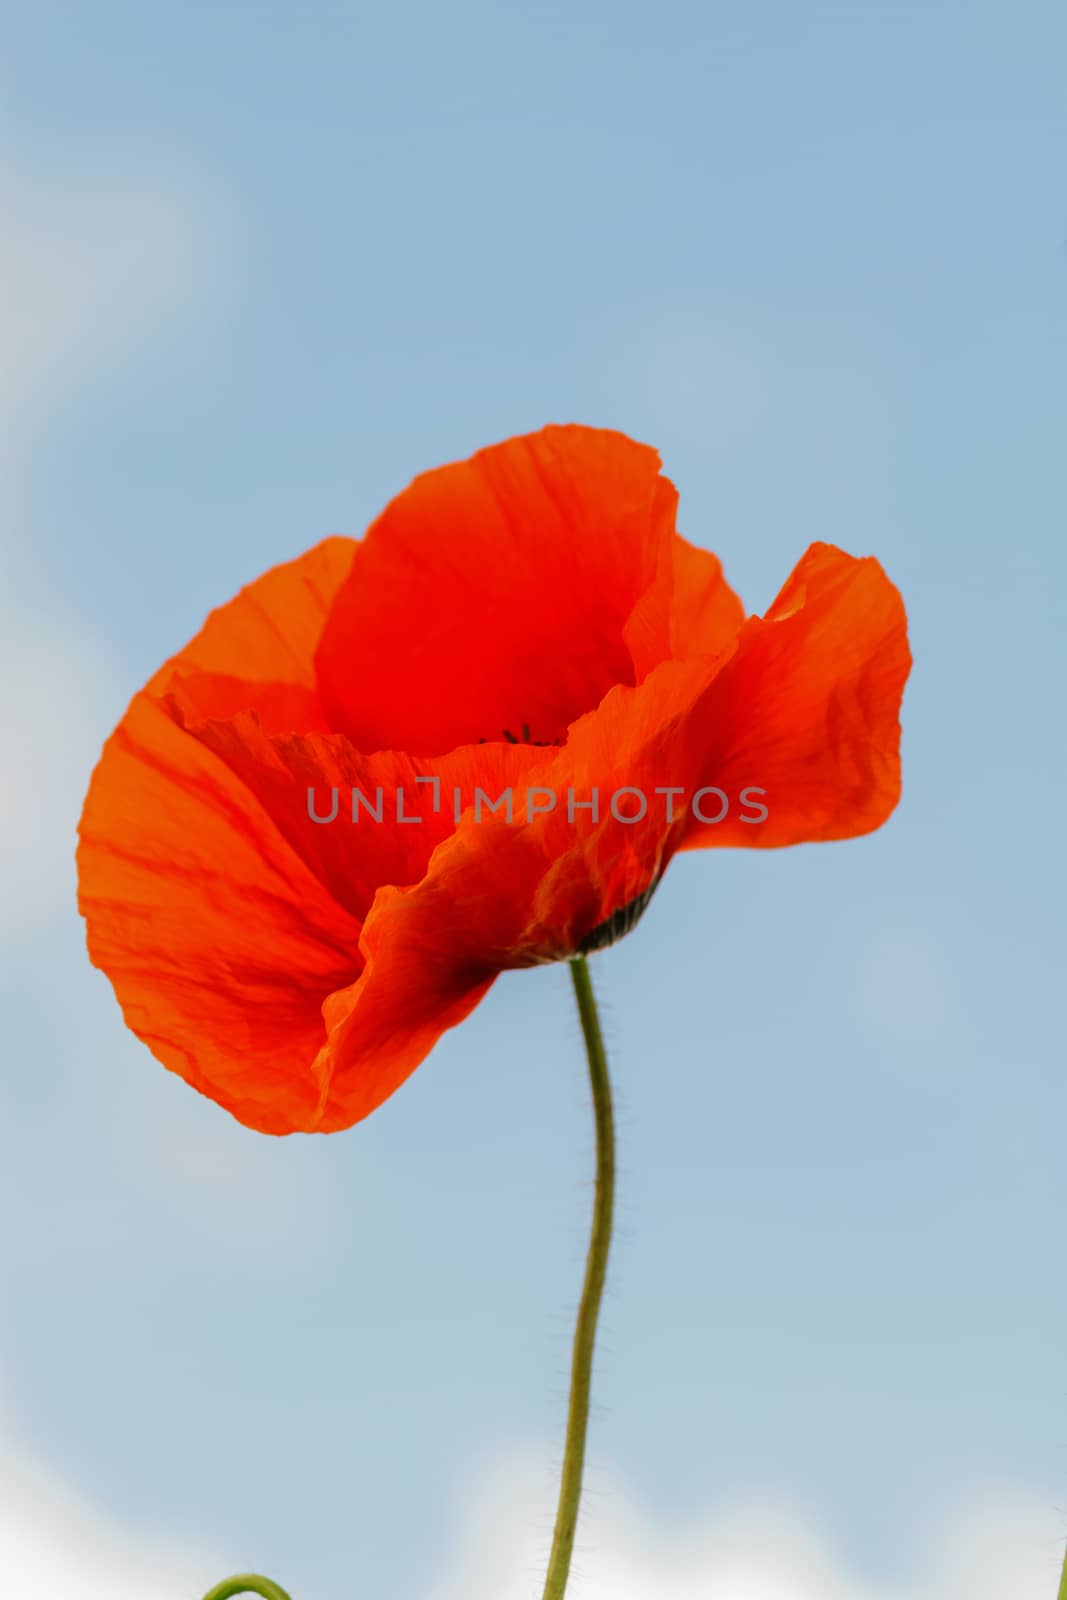 Single flower of wild red poppy on blue sky background with focus on flower by fogen